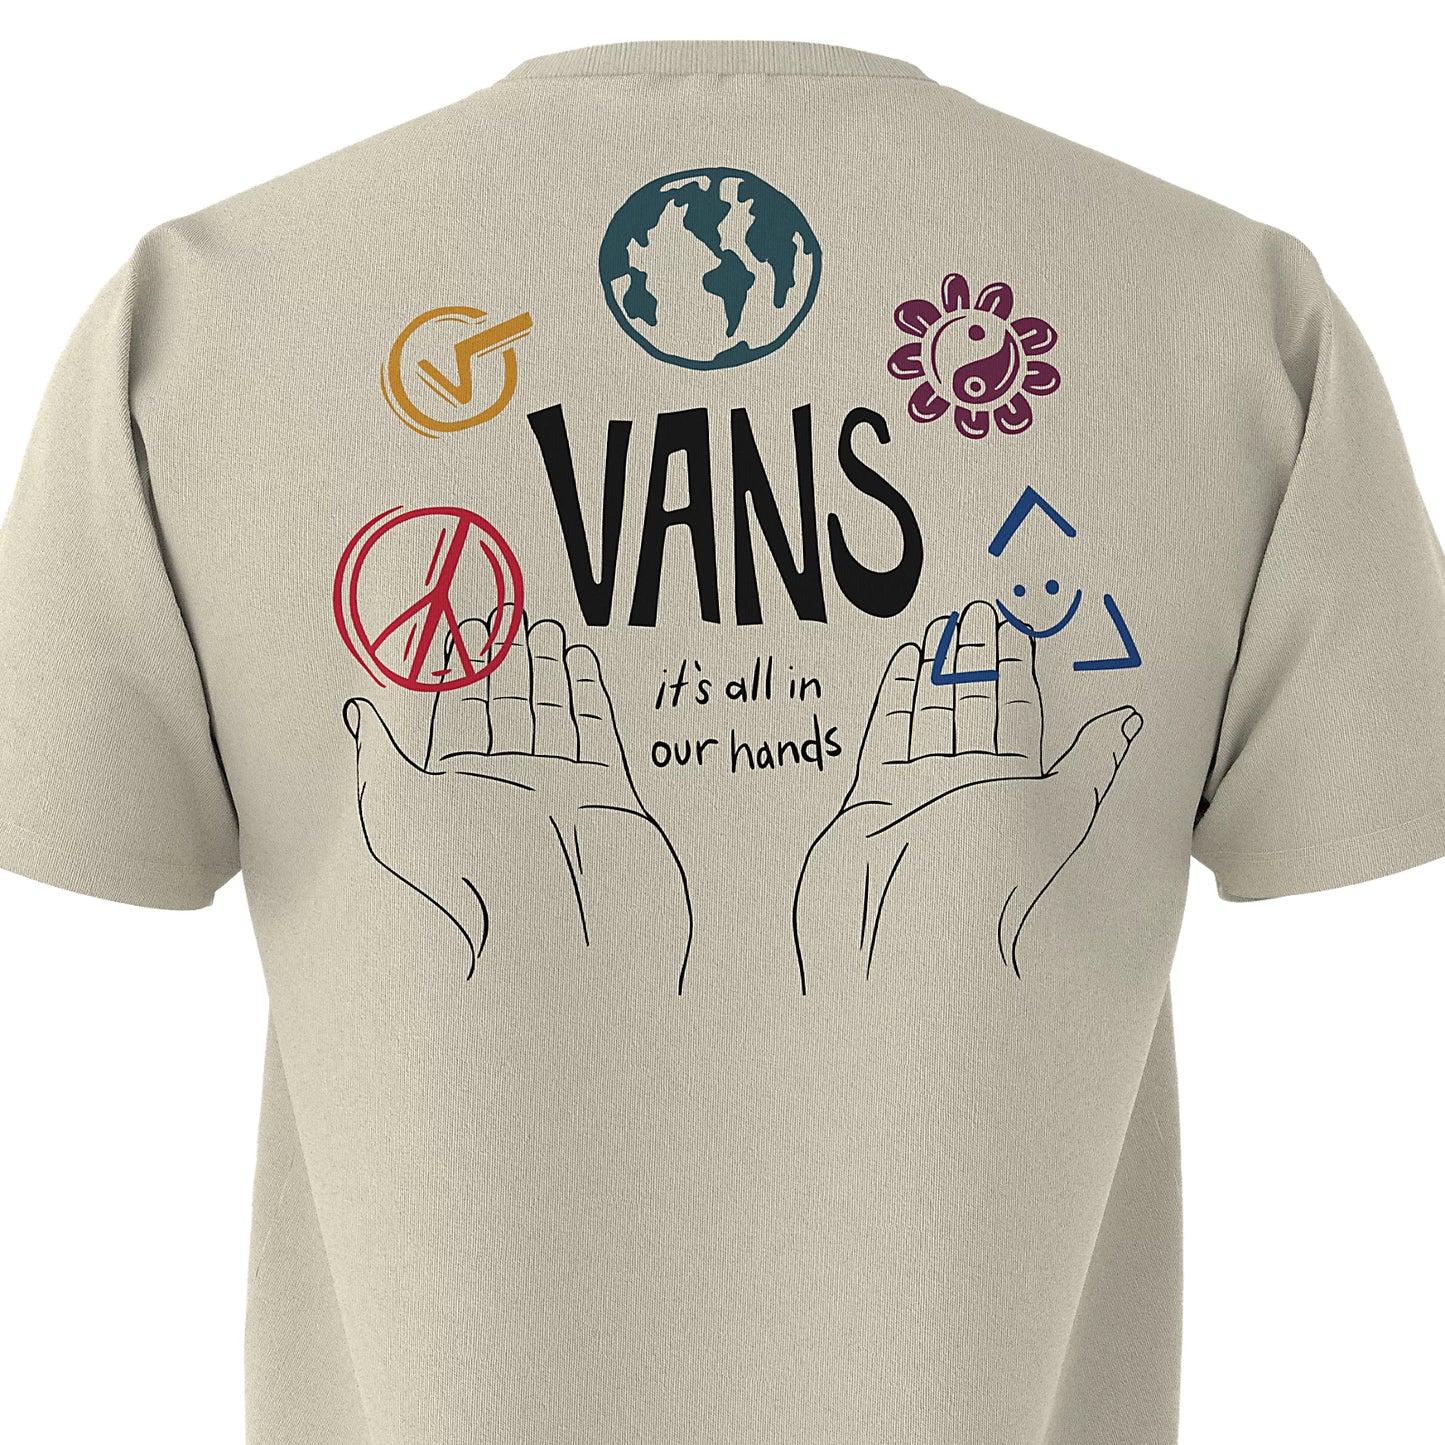 VANS - IN OUR HANDS SS TEE KIDS - ANTIQUE WHITE